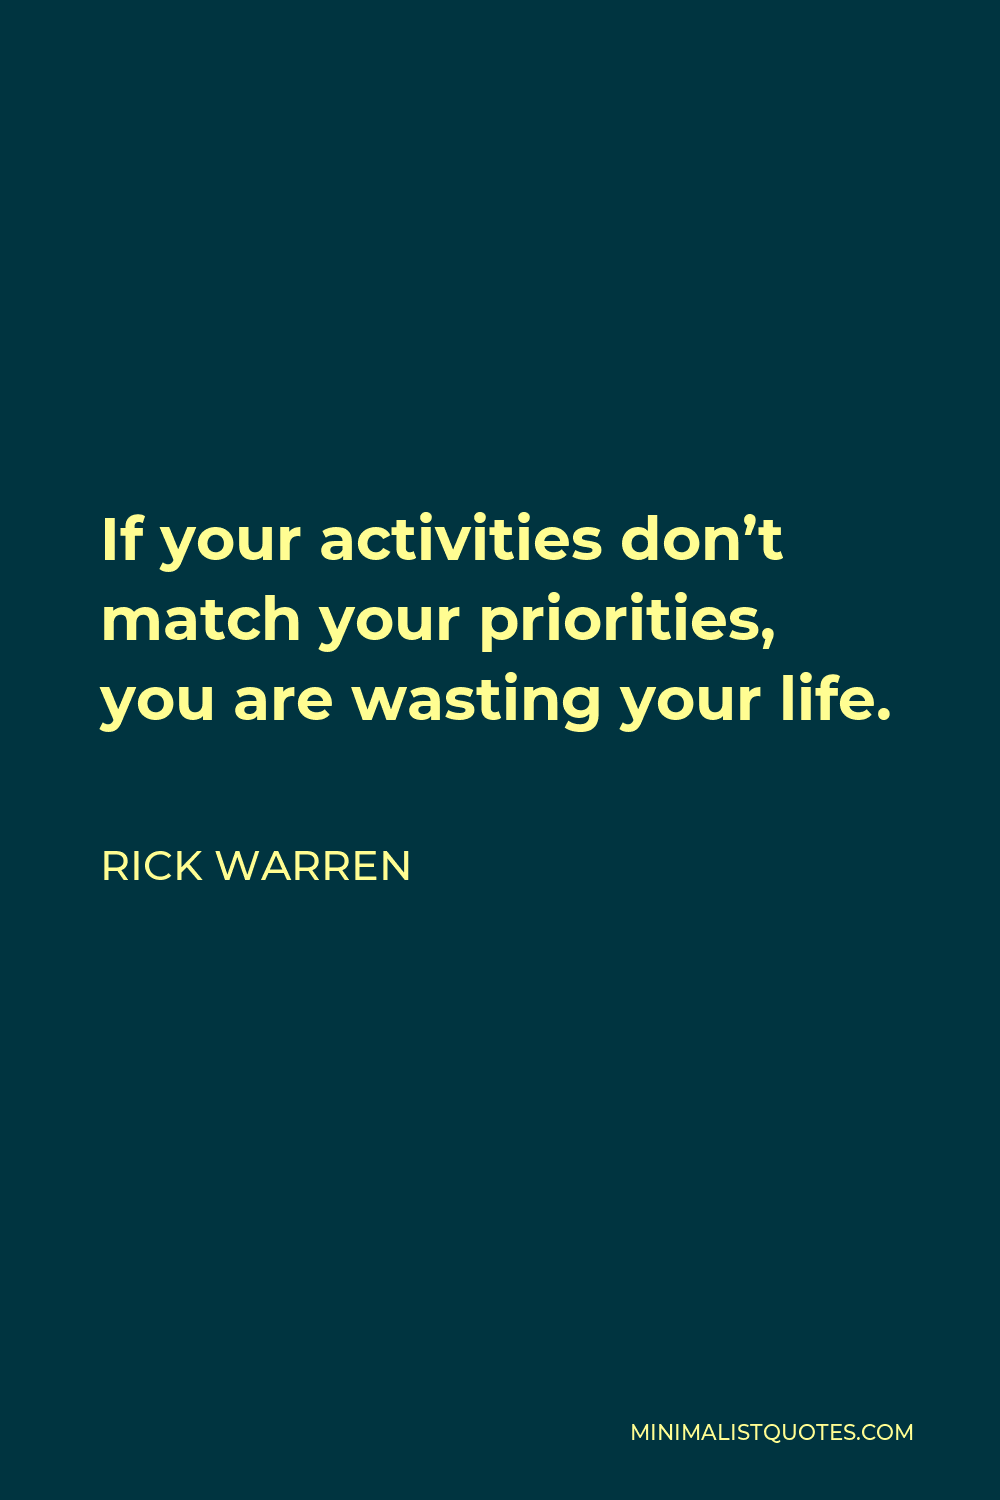 Rick Warren Quote - If your activities don’t match your priorities, you are wasting your life.